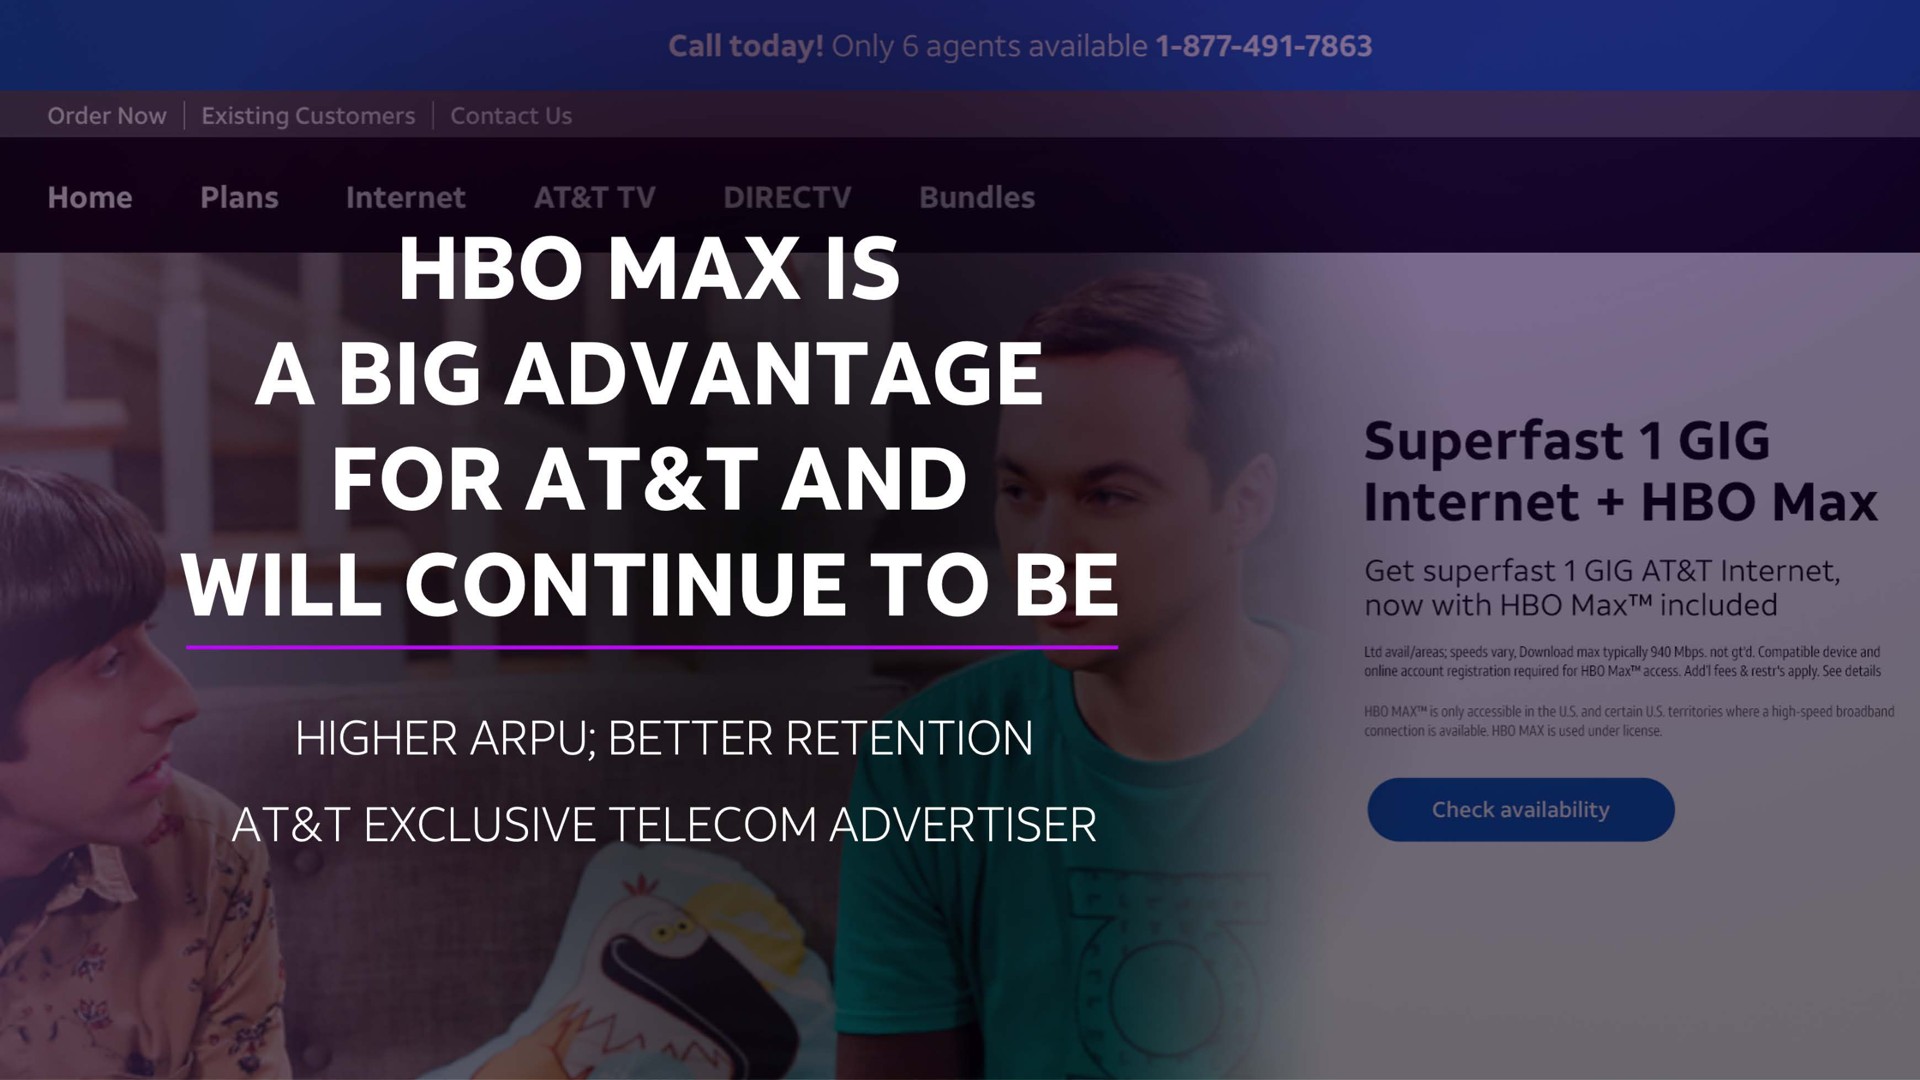 a or a big advantage for at and will continue to be i higher better retention at exclusive advertiser gig | AT&T